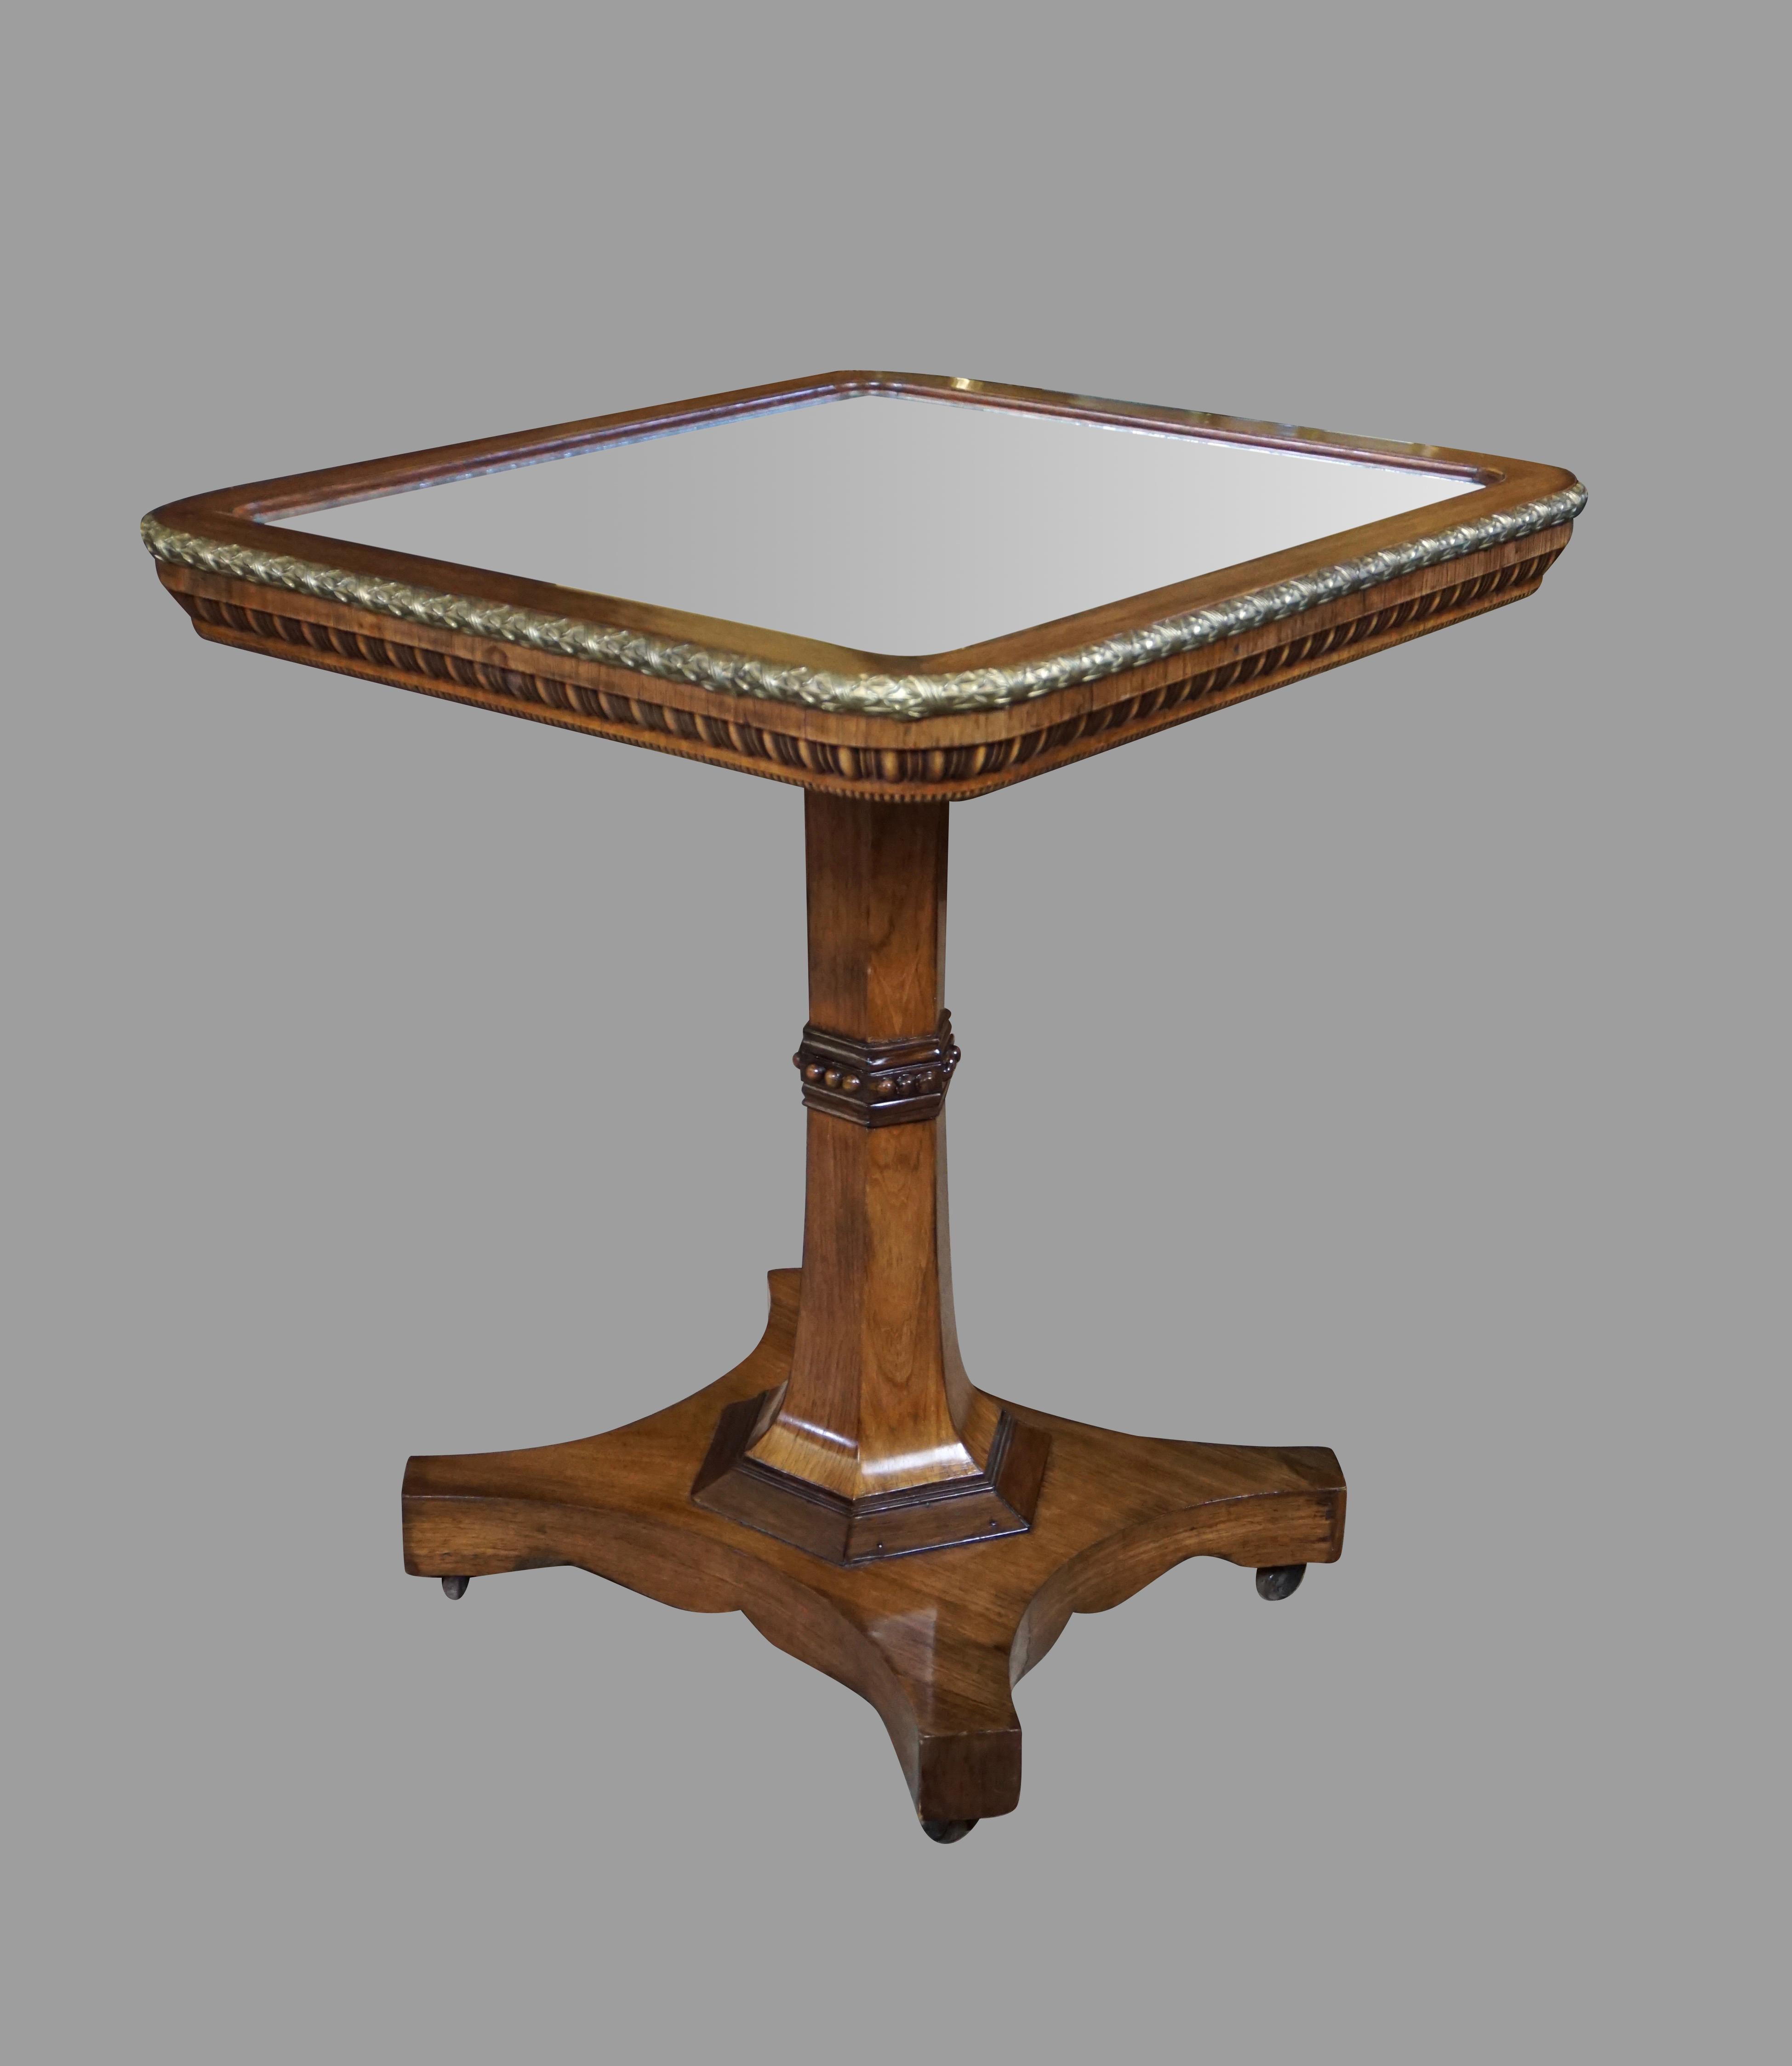 A stylish and fine quality Regency period rosewood tilt-top occasional table with an inset mirrored top, framed by a gilt metal edge, the side with gadrooned decoration, supported on a hexagonal column with central applied decoration terminating in